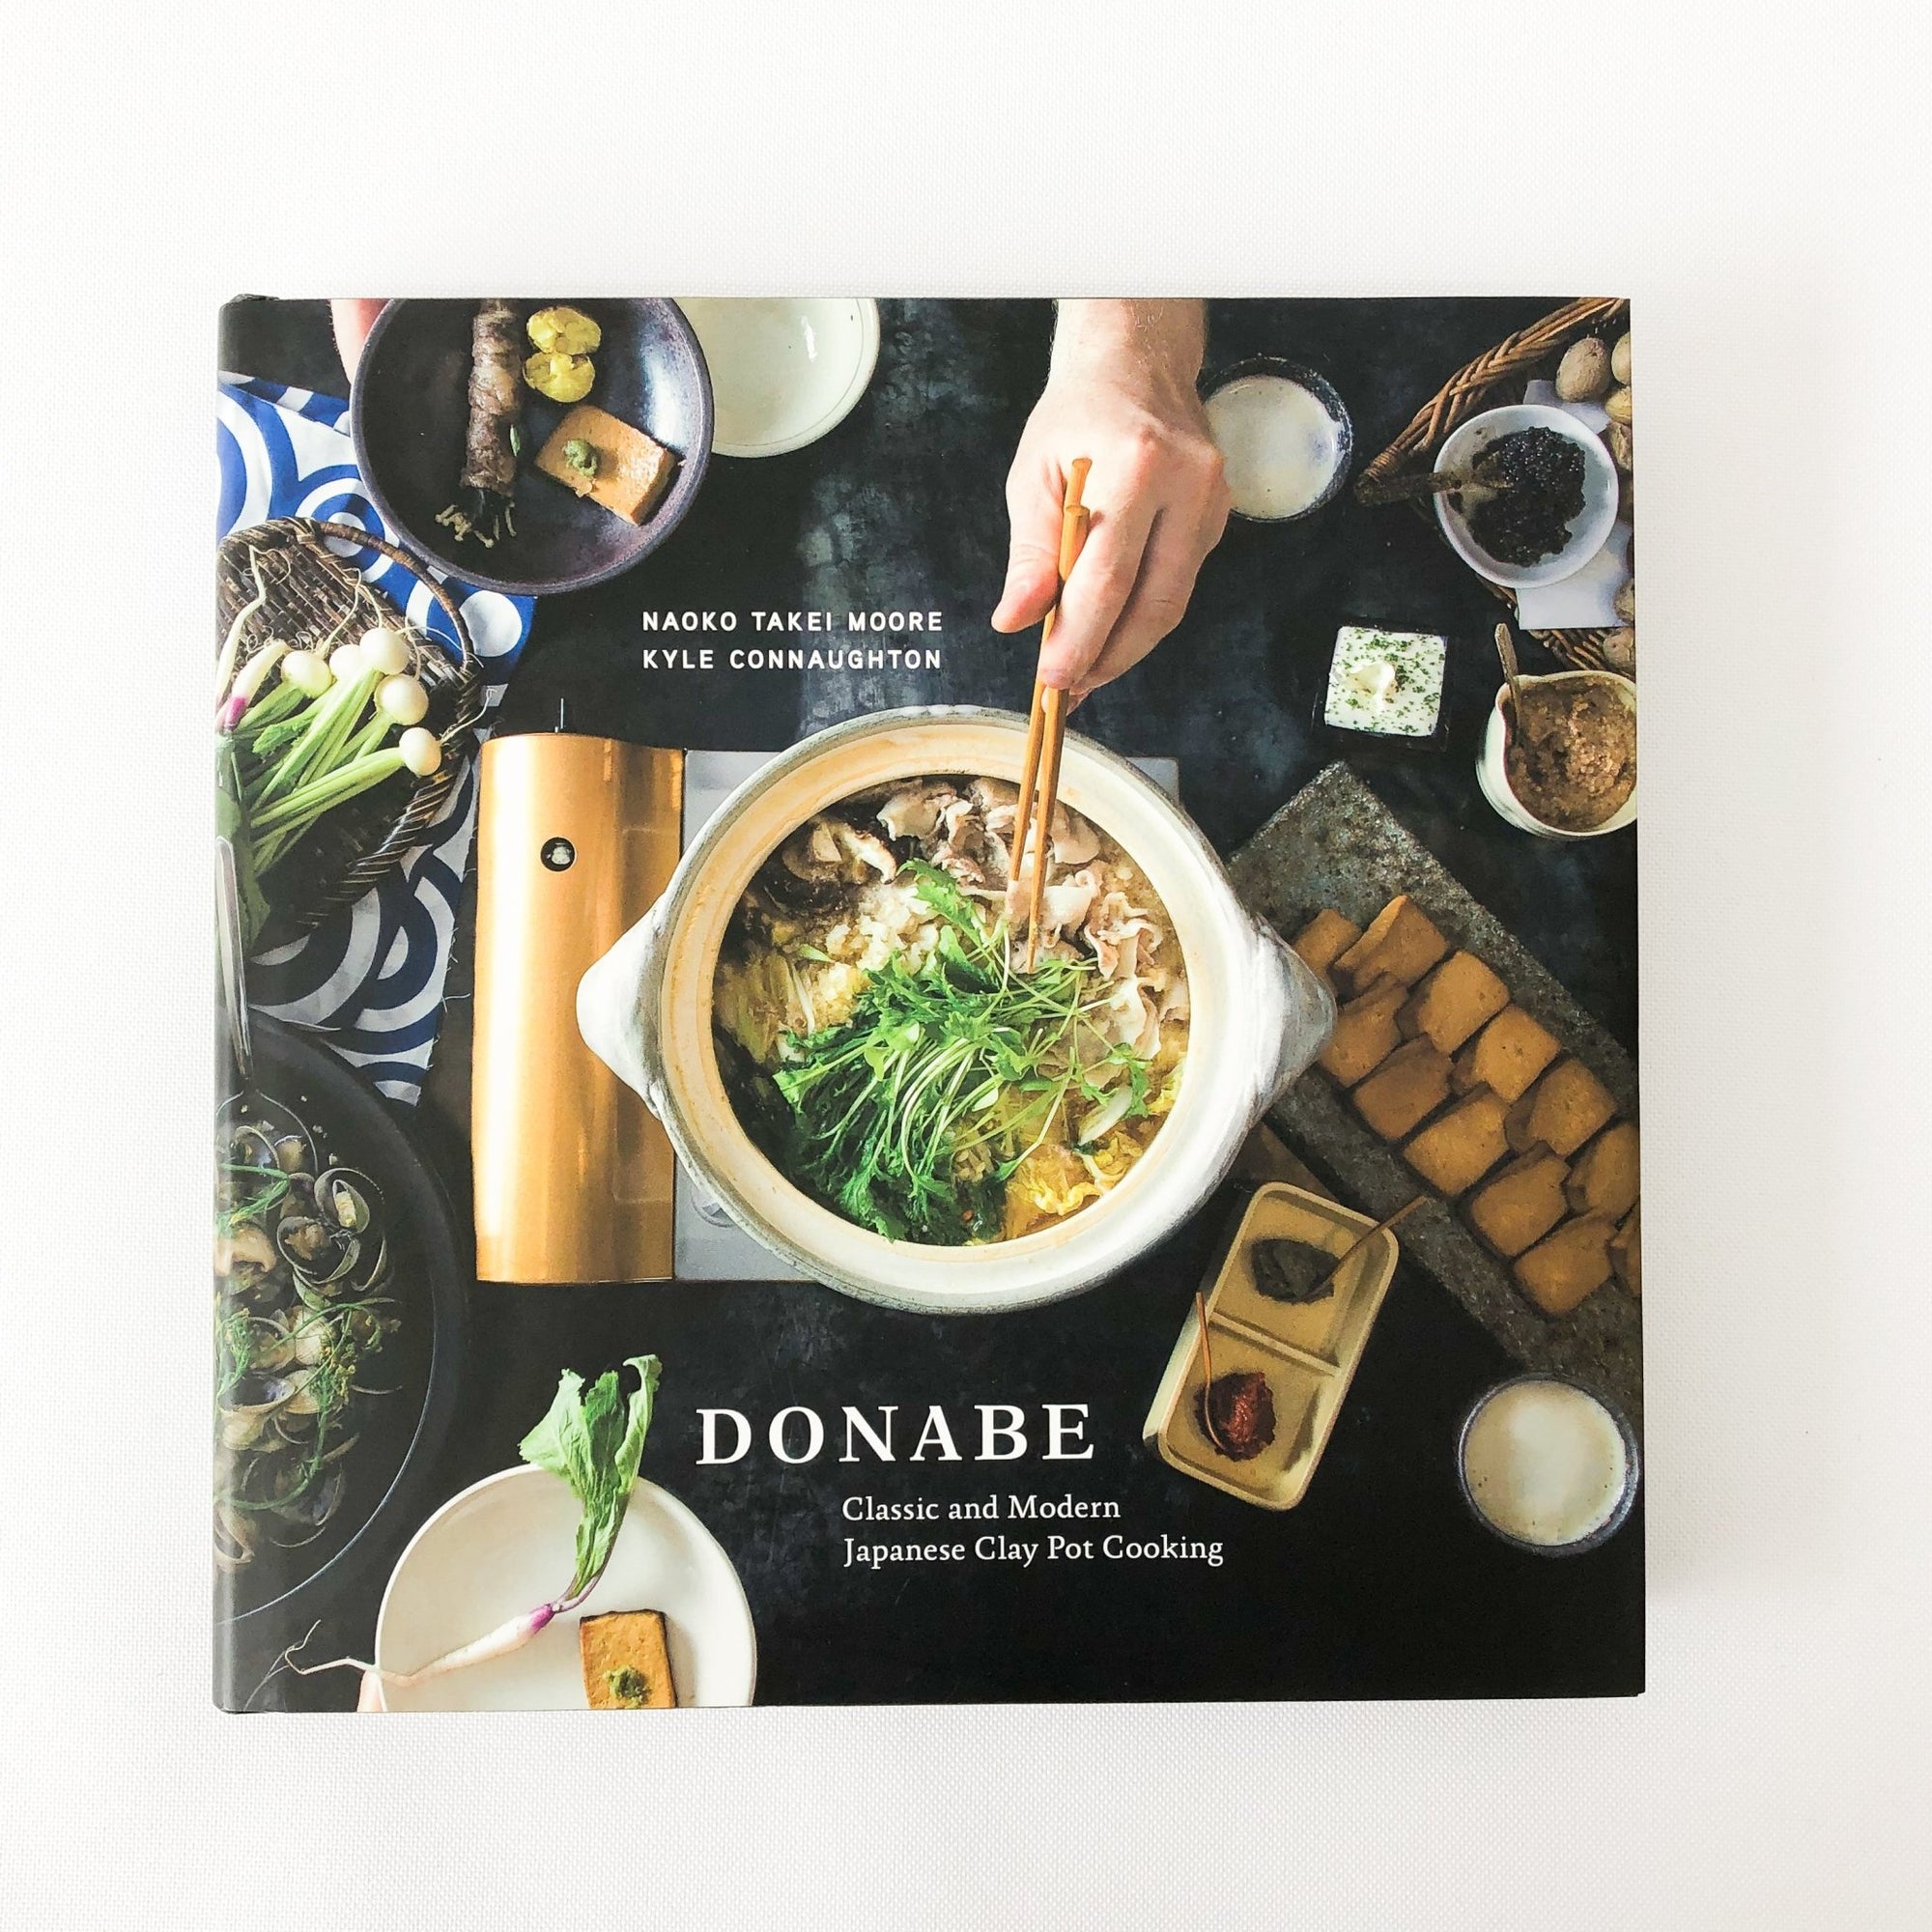 Donabe book - tortoise general store